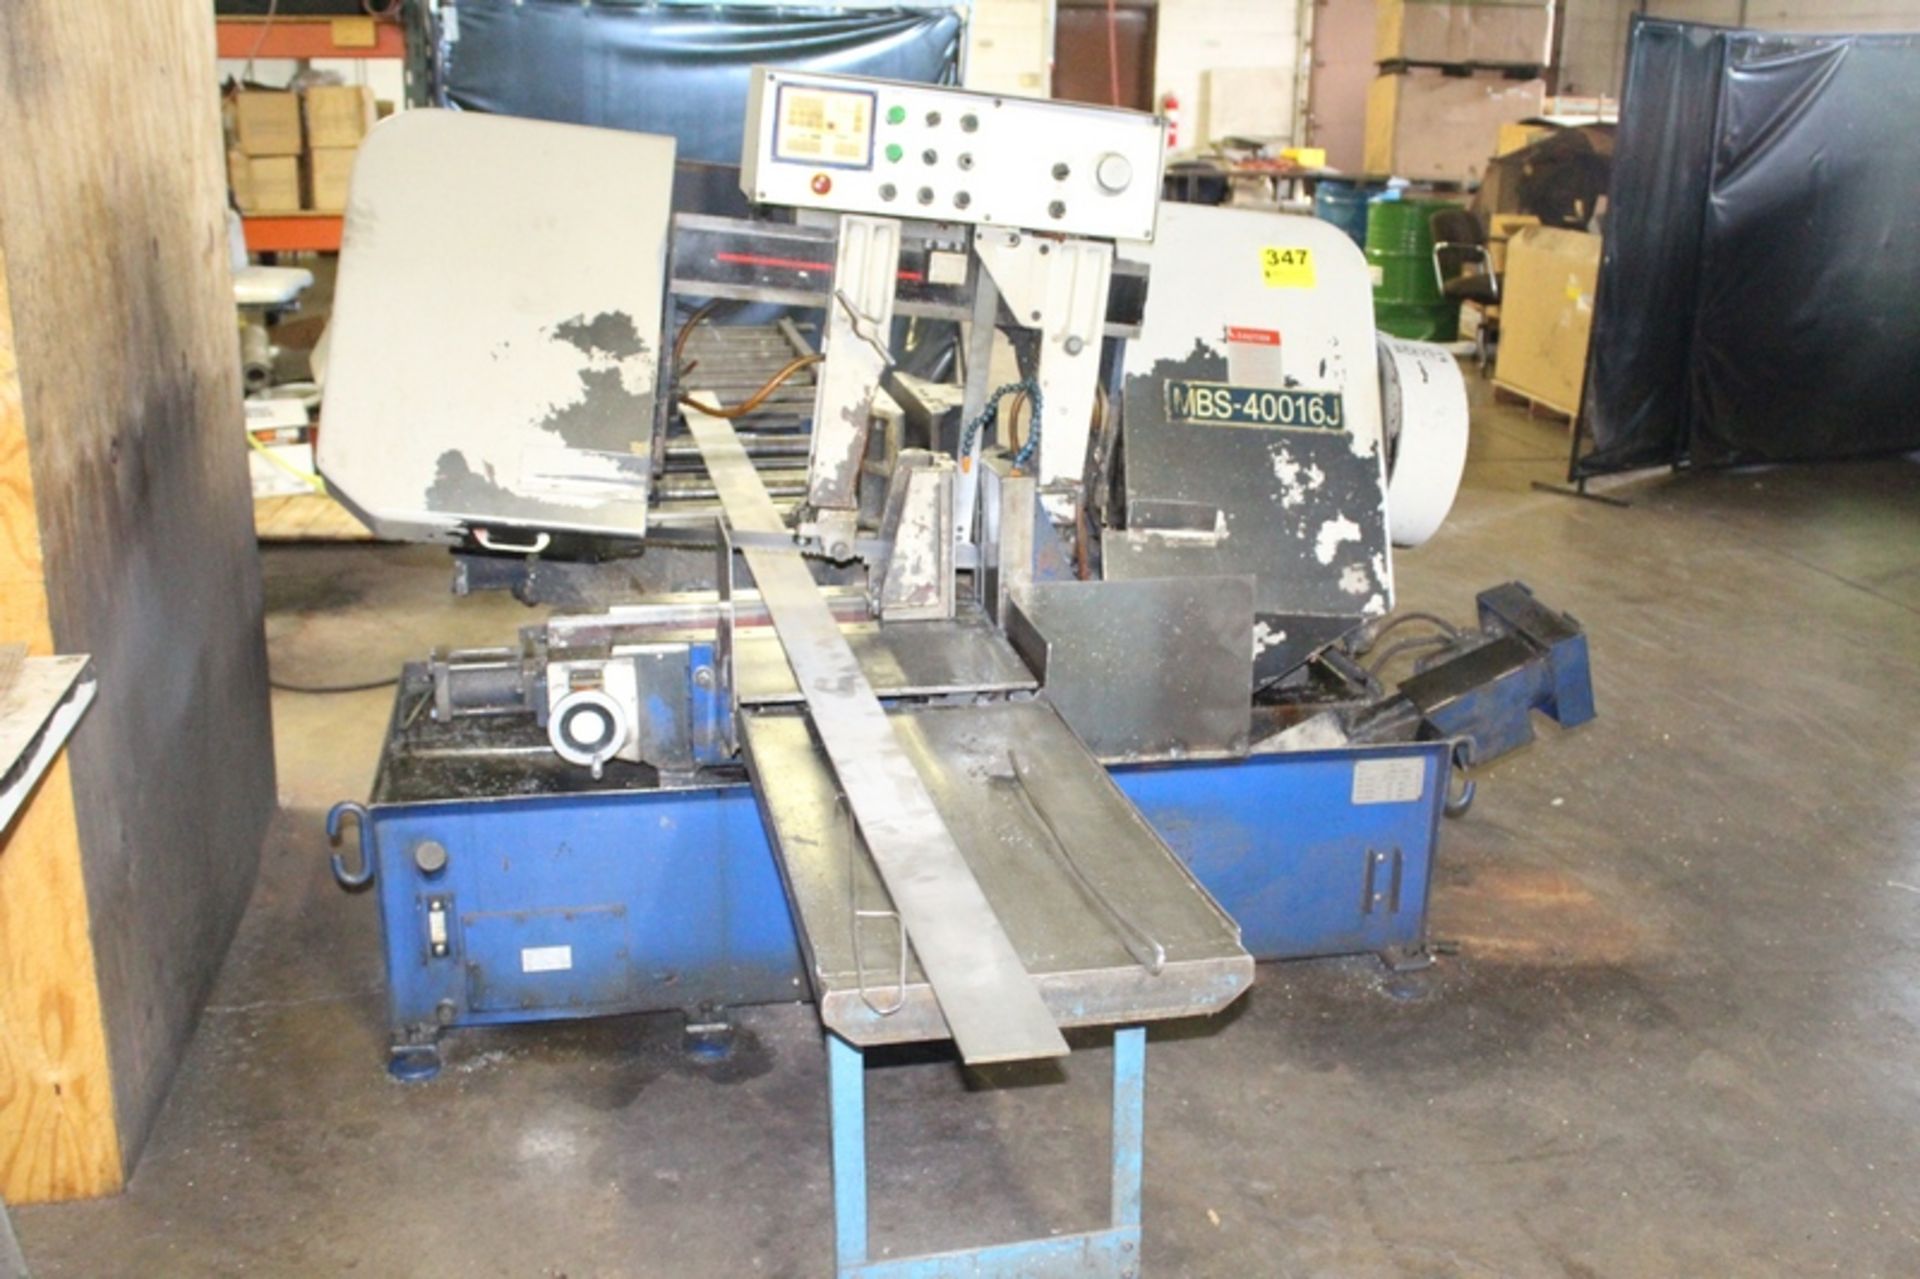 JET MODEL MBS-40016J AUTOMATIC HORIZONTAL BAND SAW, S/N 980716 (NEW 1998), WITH AUTOMATIC STOCK